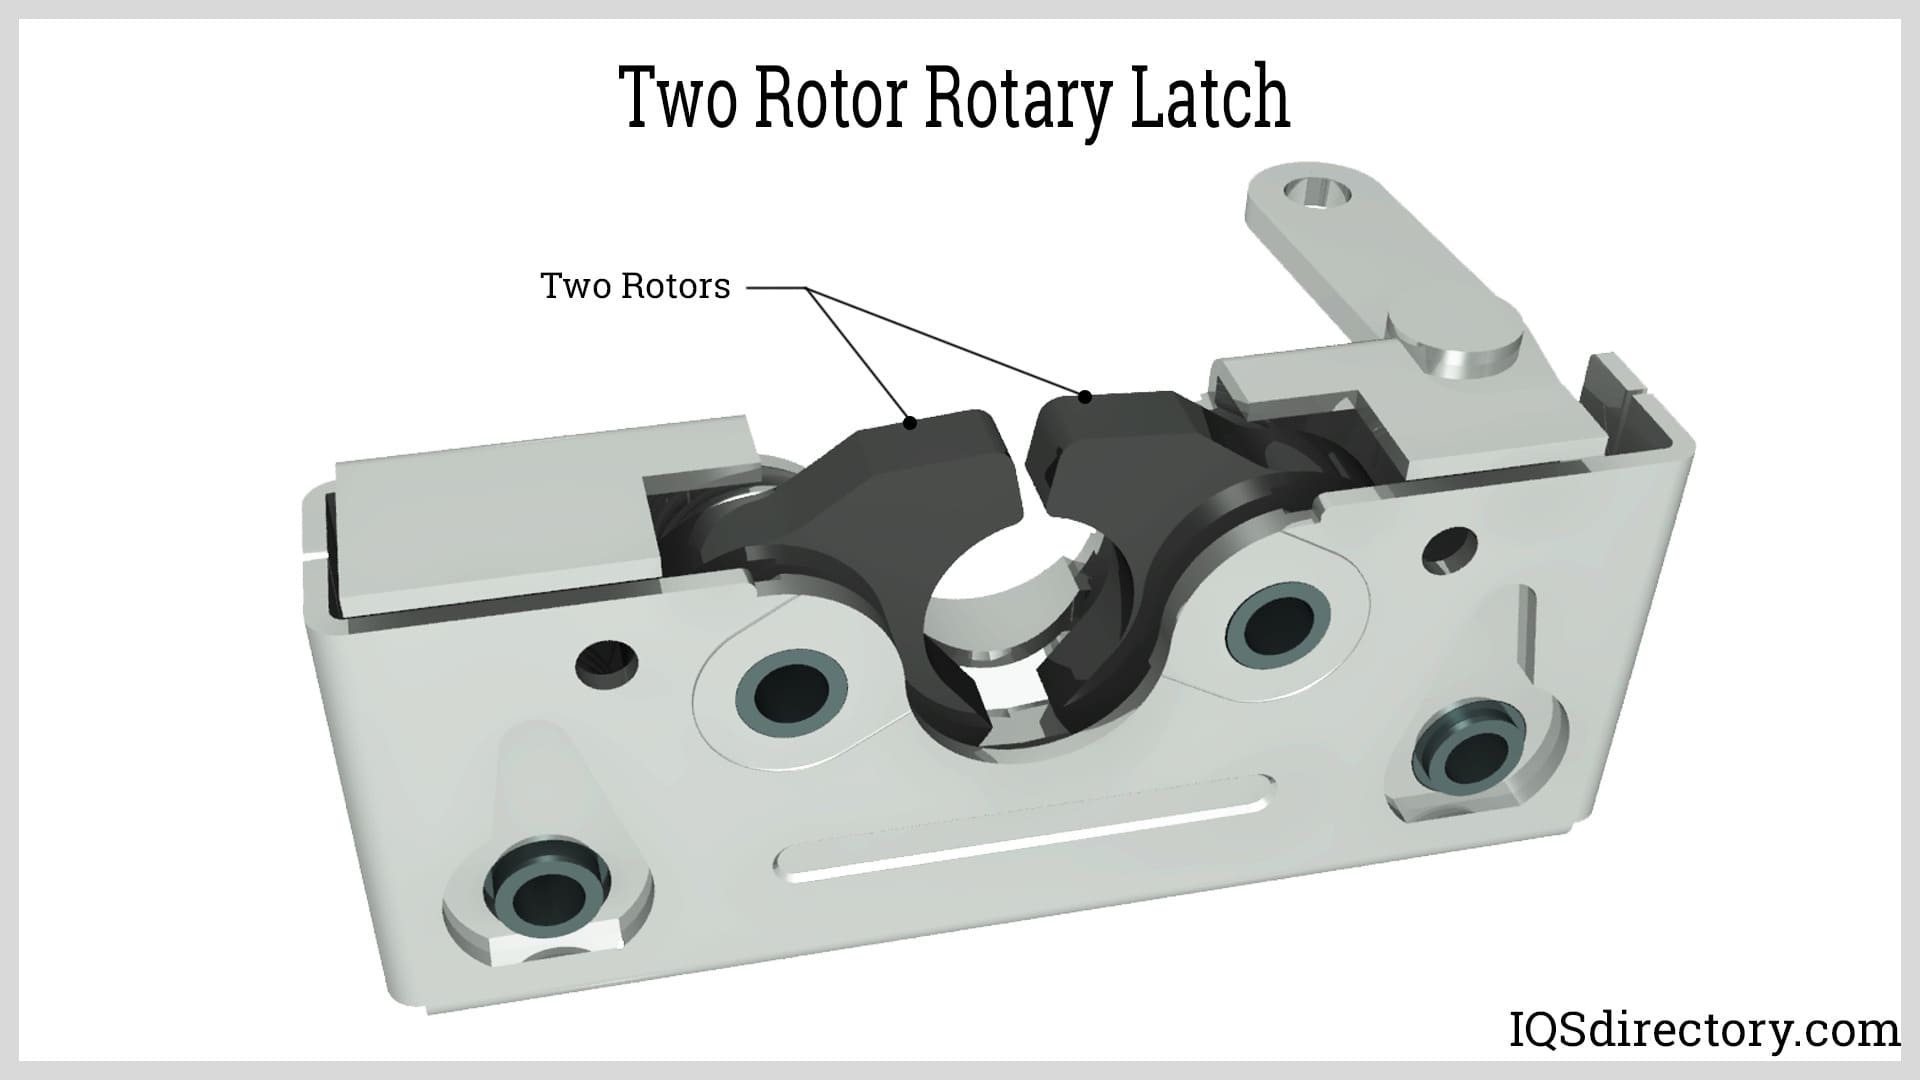 Two Rotor Rotary Latch